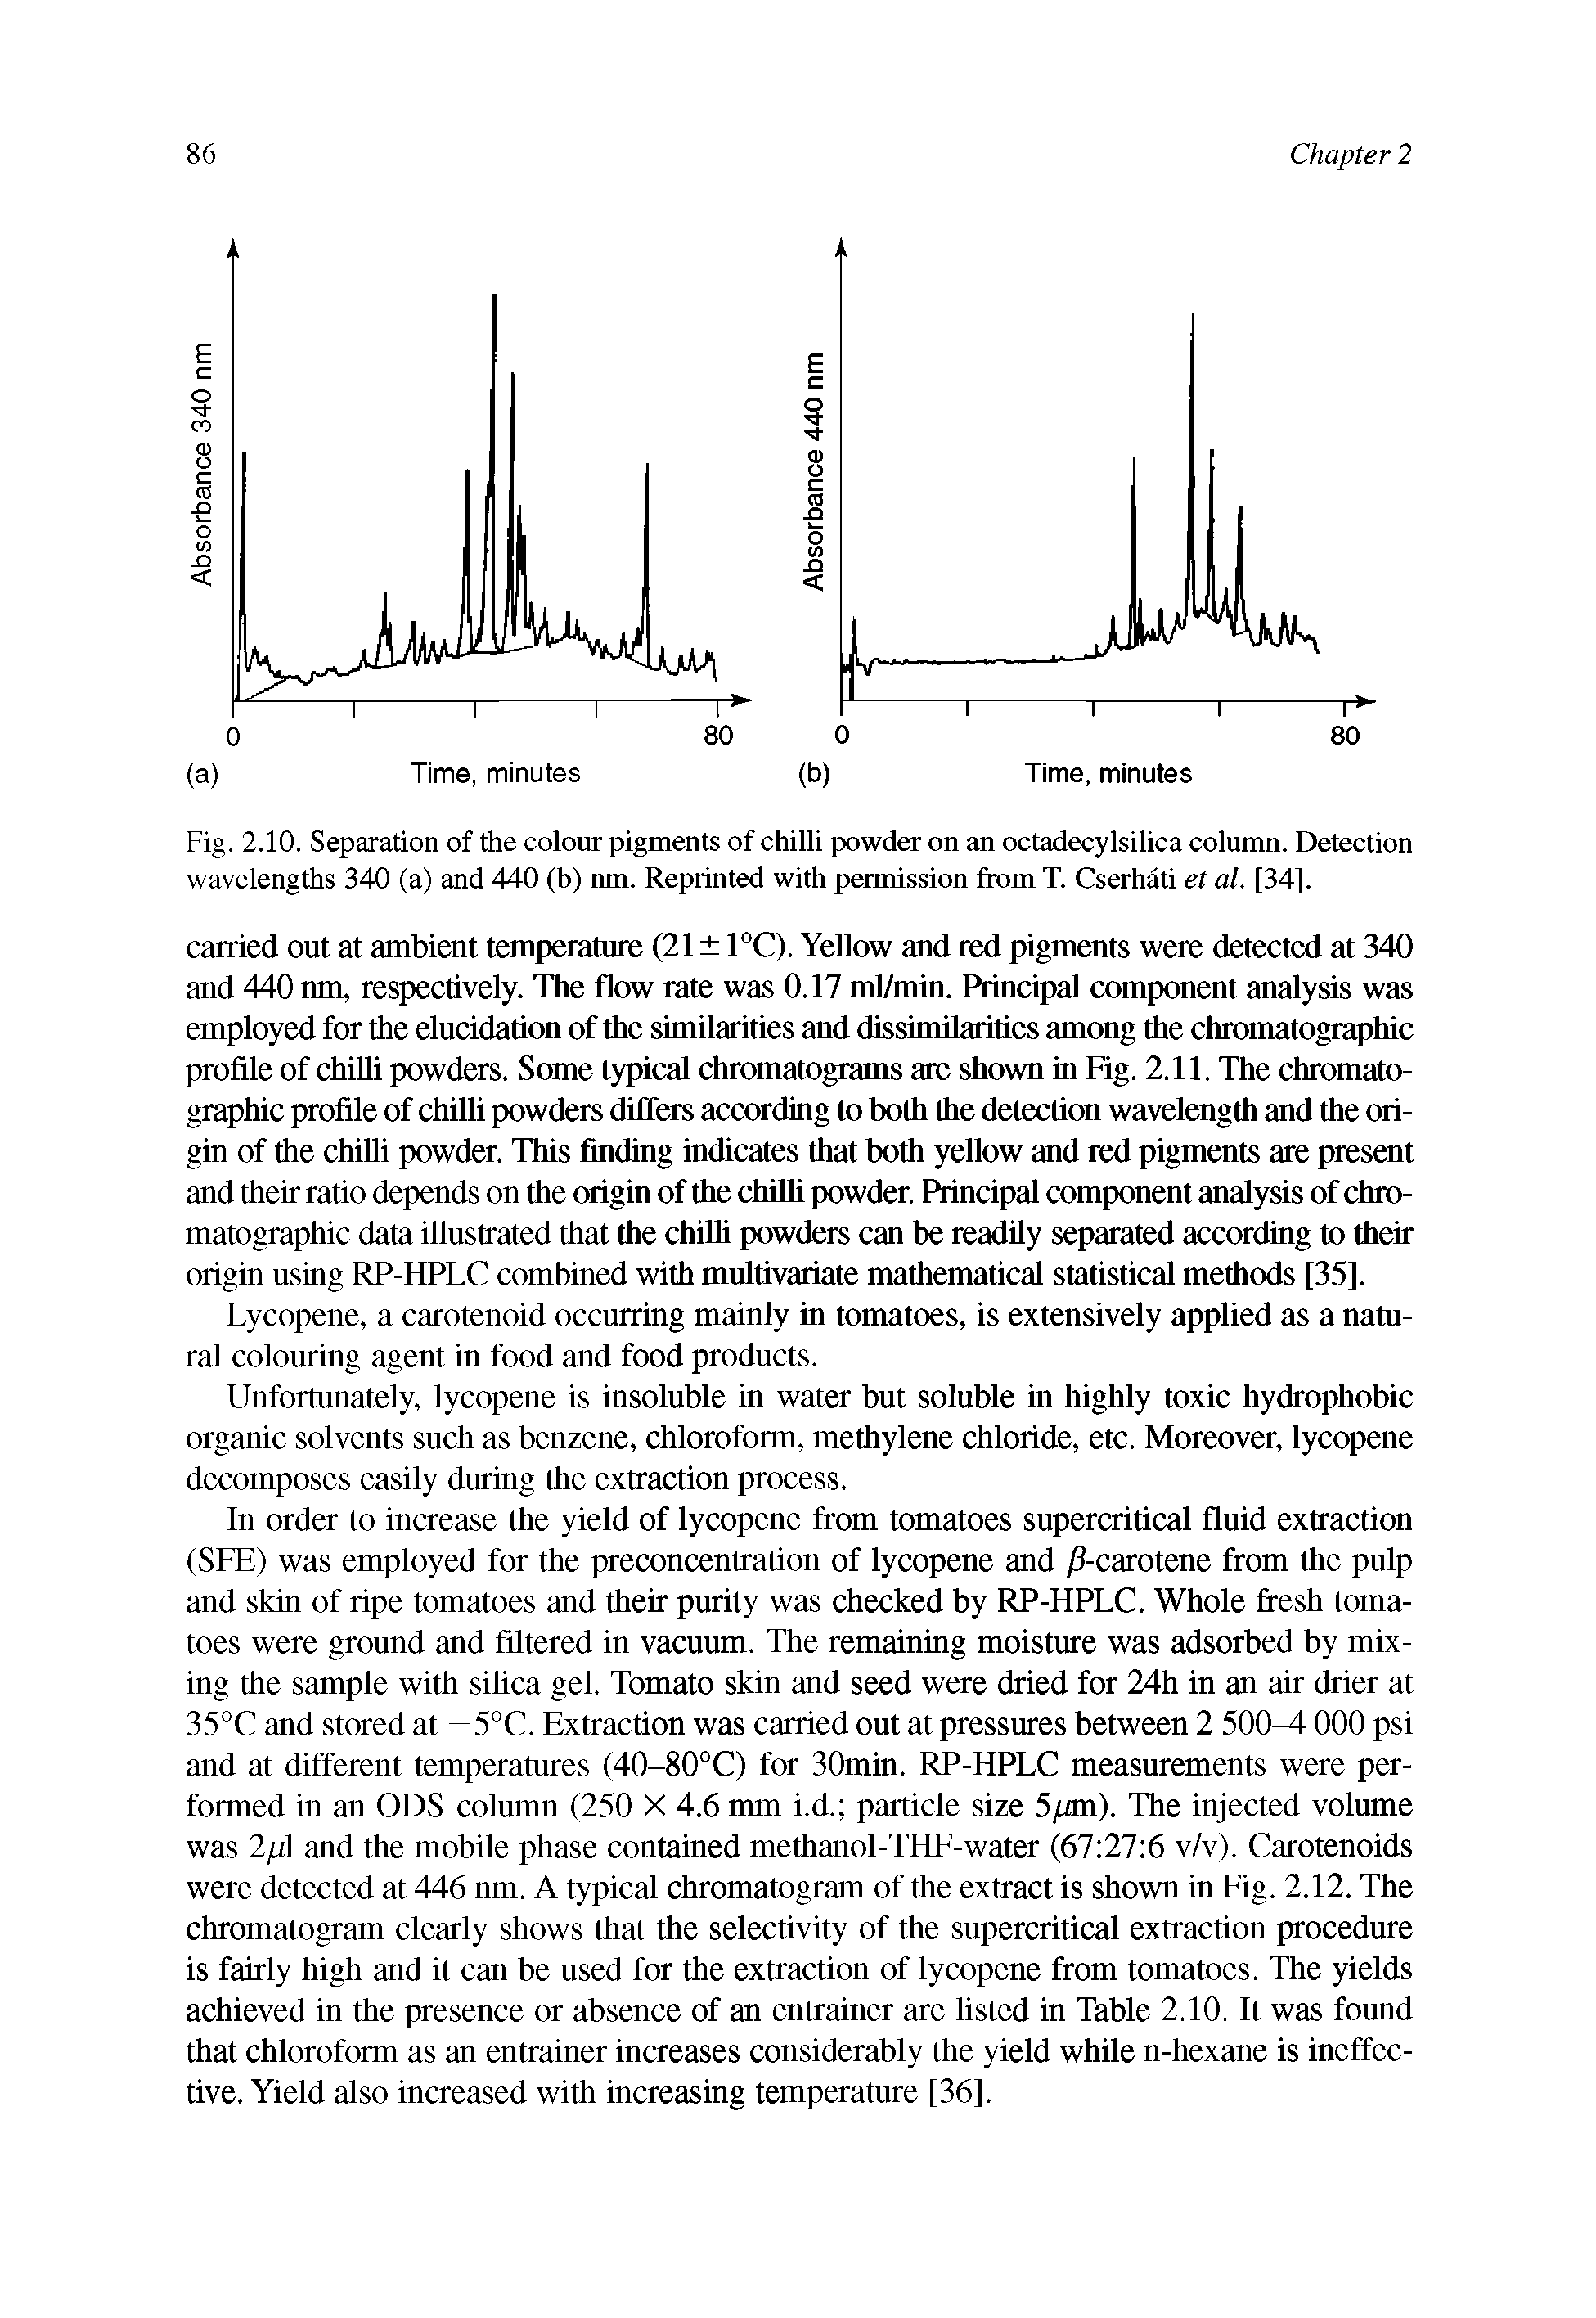 Fig. 2.10. Separation of the colour pigments of chilli powder on an octadecylsilica column. Detection wavelengths 340 (a) and 440 (b) nm. Reprinted with permission from T. Cserhati et al. [34].